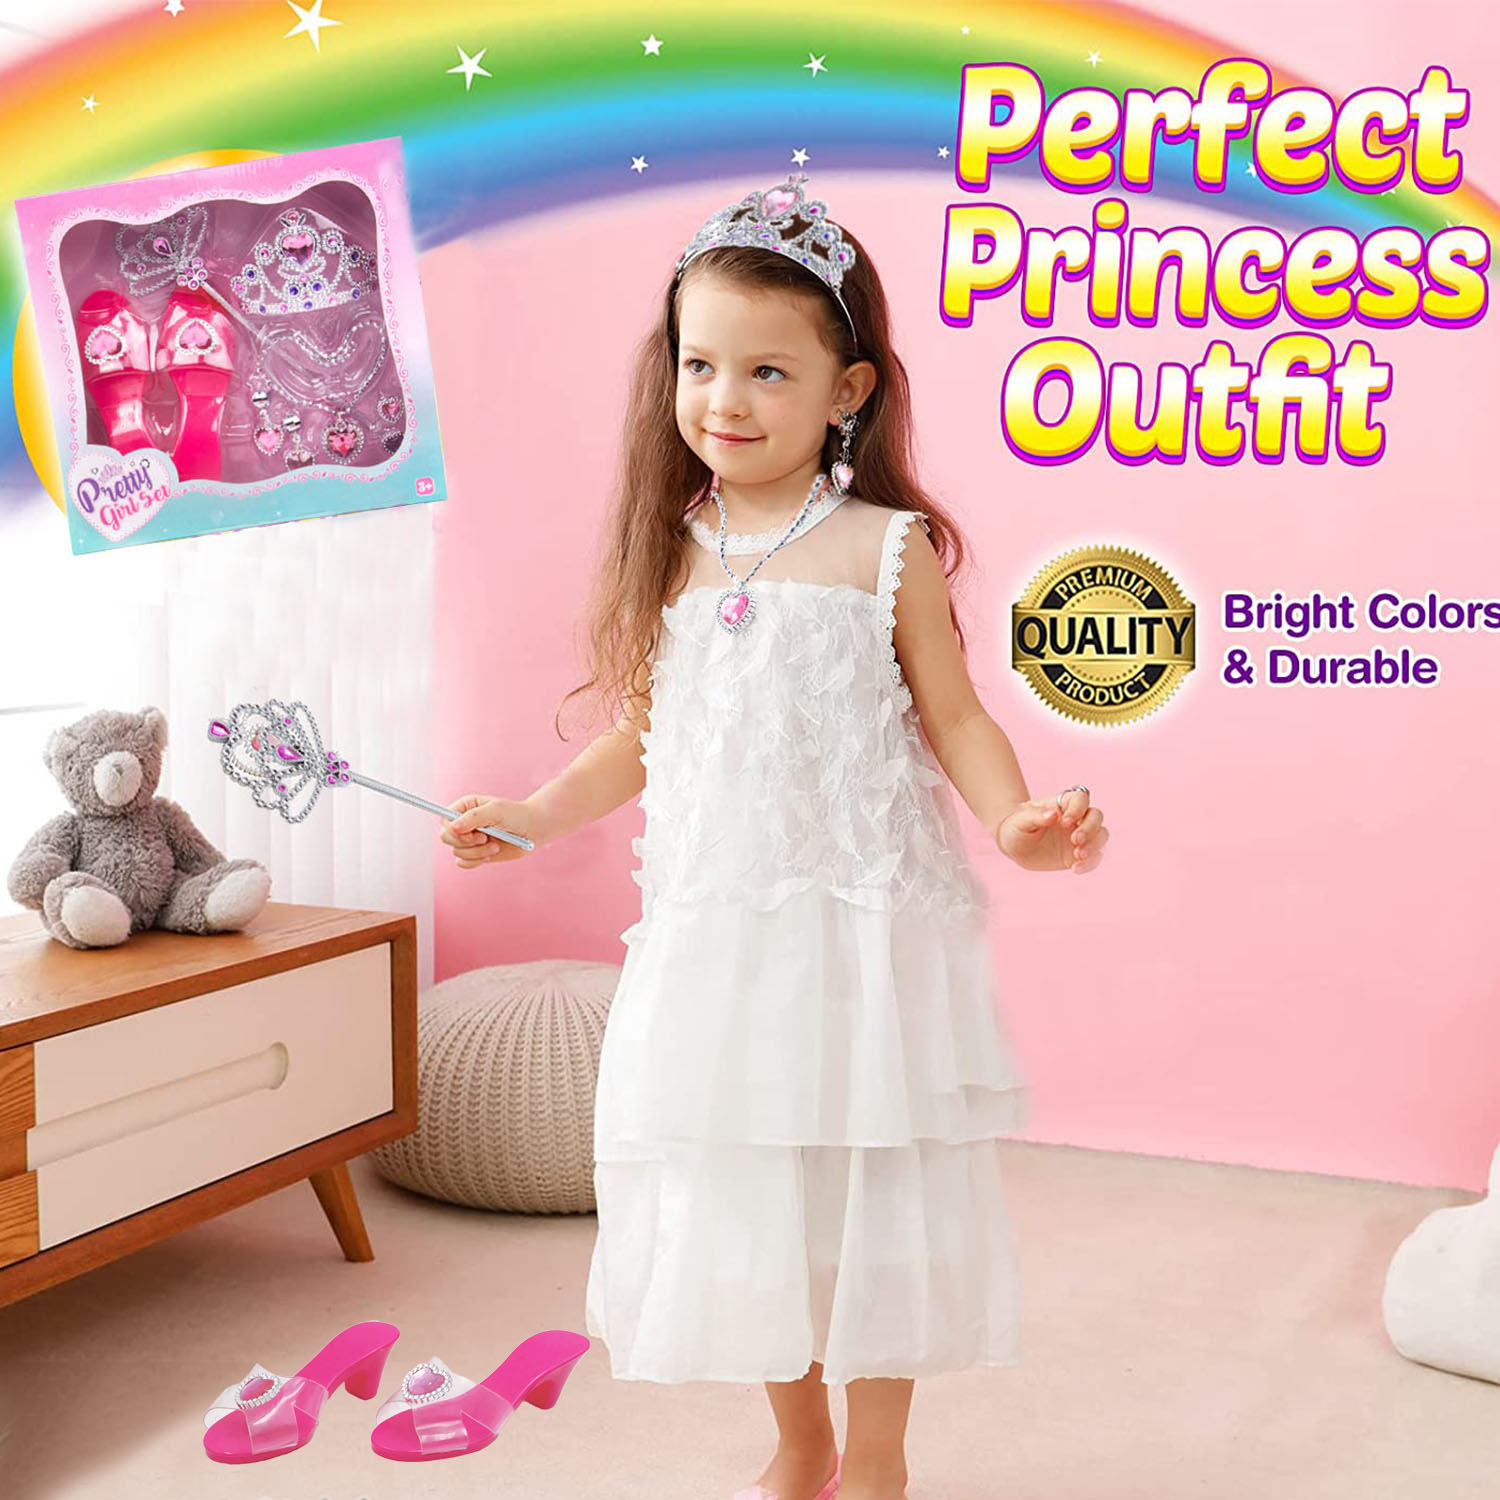 Princess Toys, Princess Dress up Shoes and Jewelry Toys Princess Accessories Play Gift Set for Little Girls 3 4 5 6 Year Old - image 2 of 5